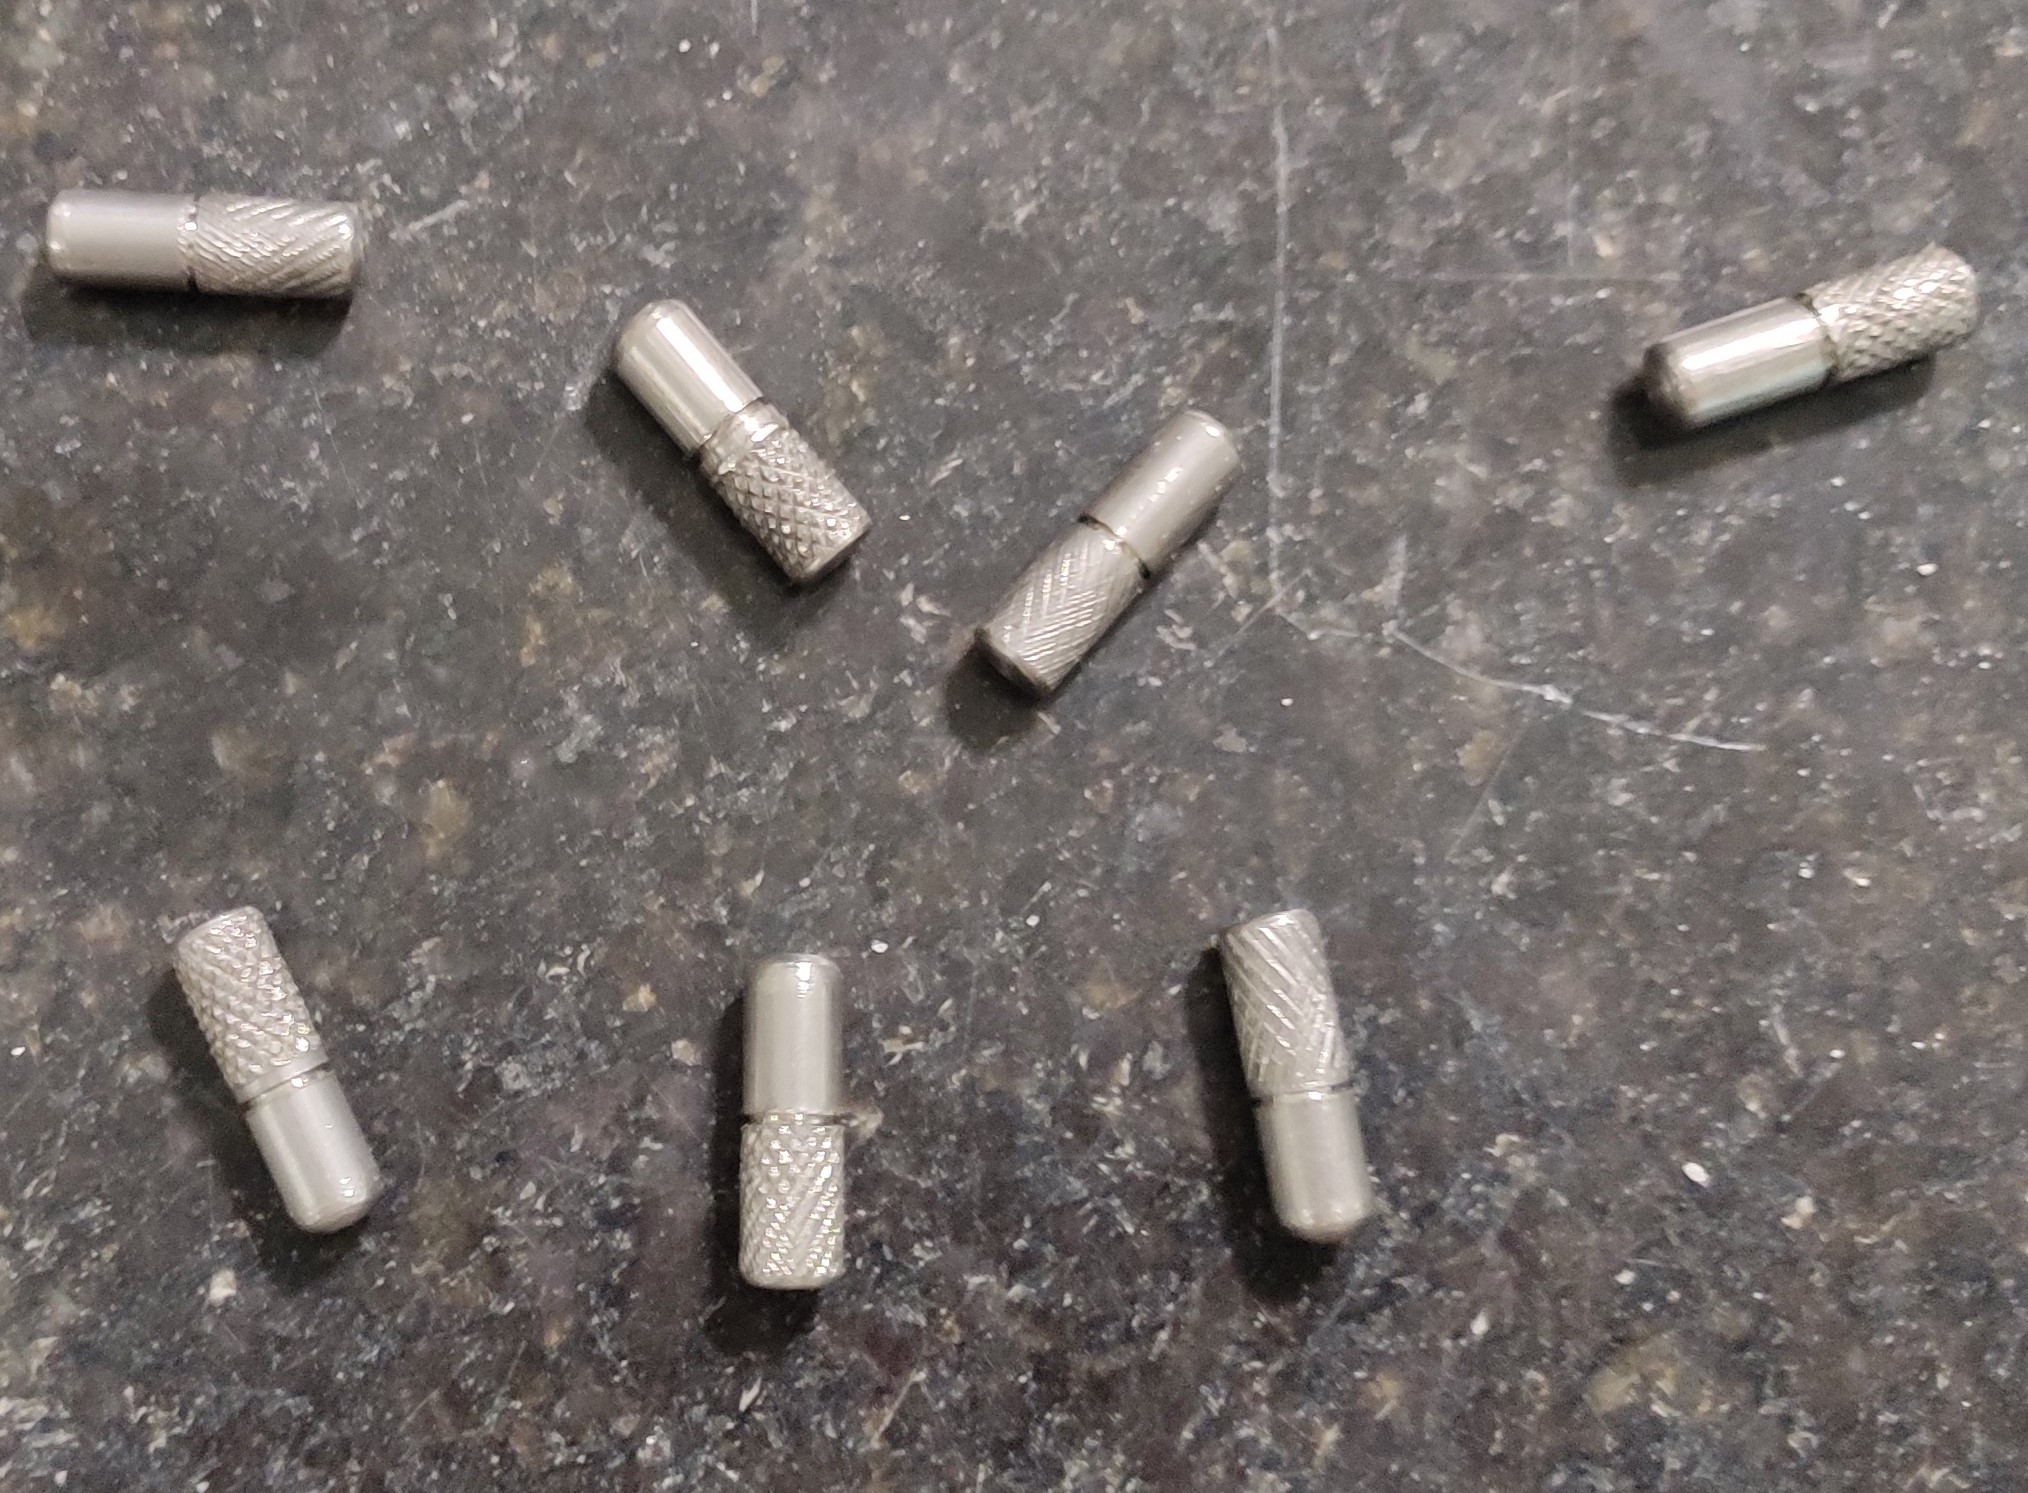 REFERENCE POINT PINS - MEASURING STUDS - FOR SHRINKAGE BAR MOULD - ASTM C490